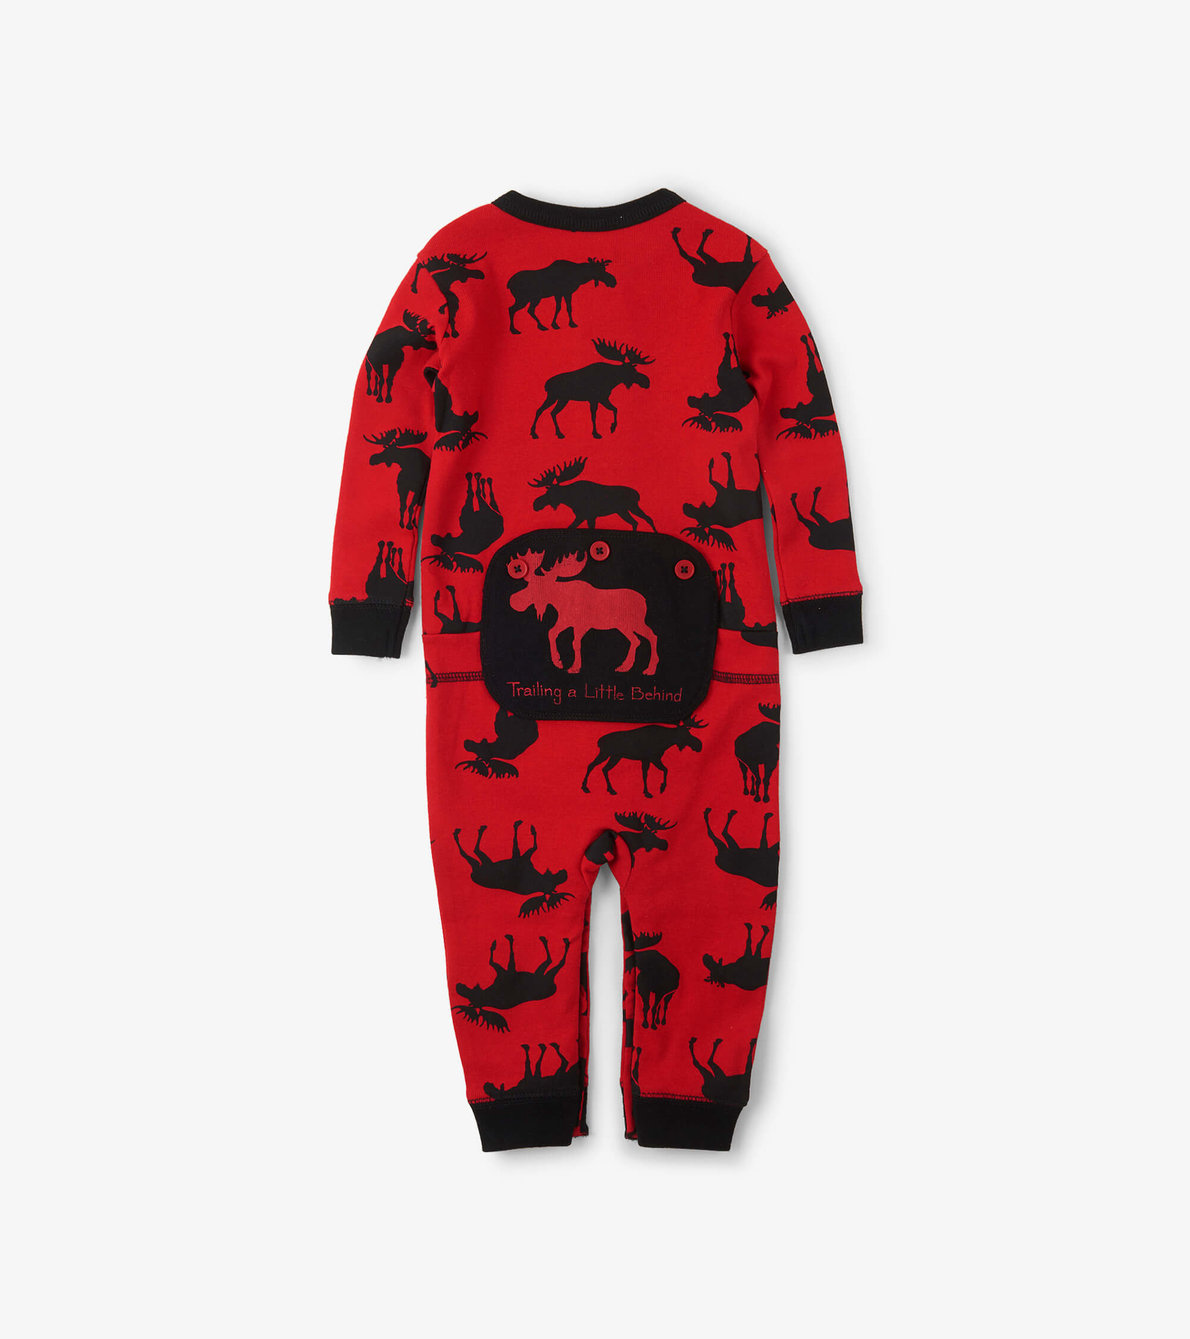 View larger image of Moose on Red "Trailing Behind" Baby Union Suit